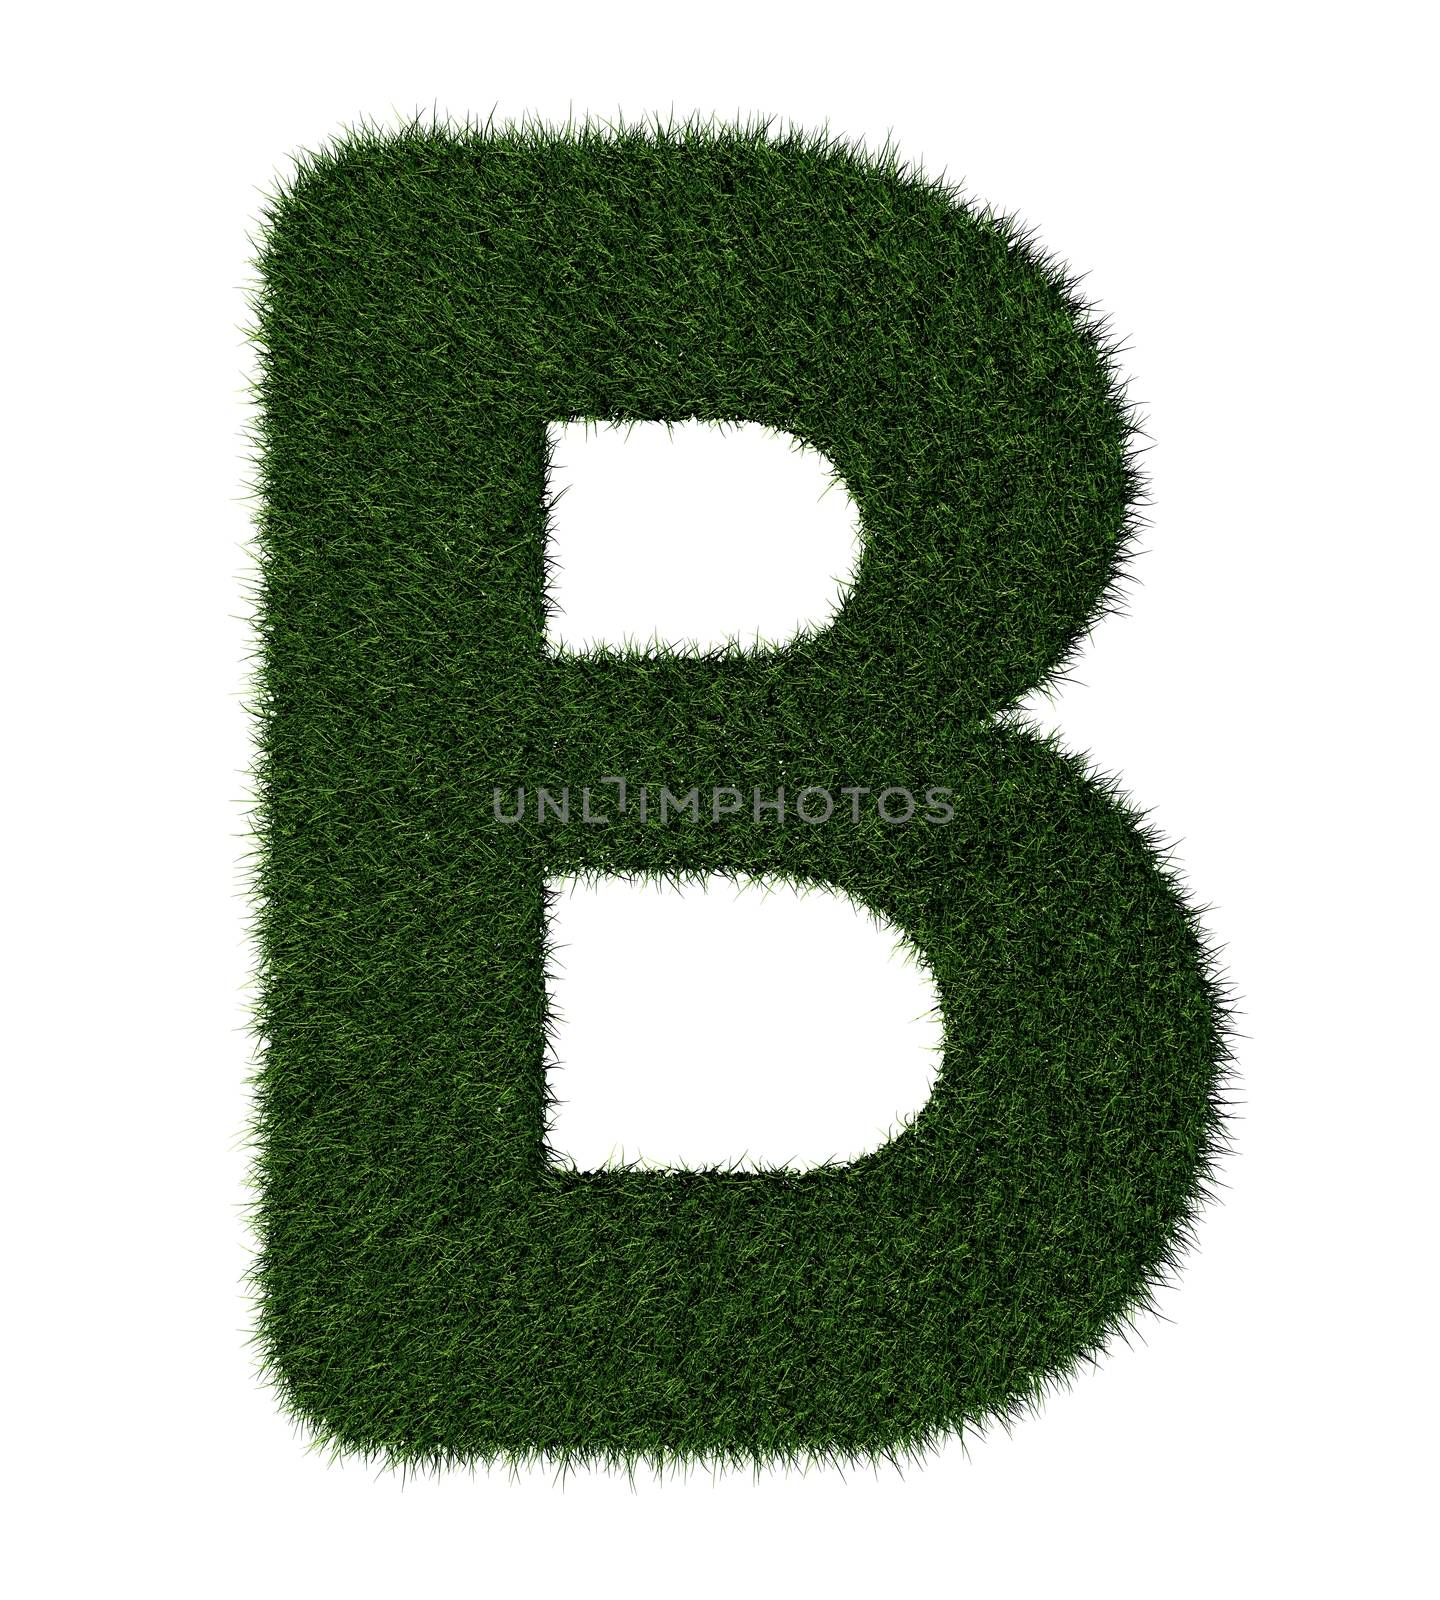 Letter B made with blades of grass